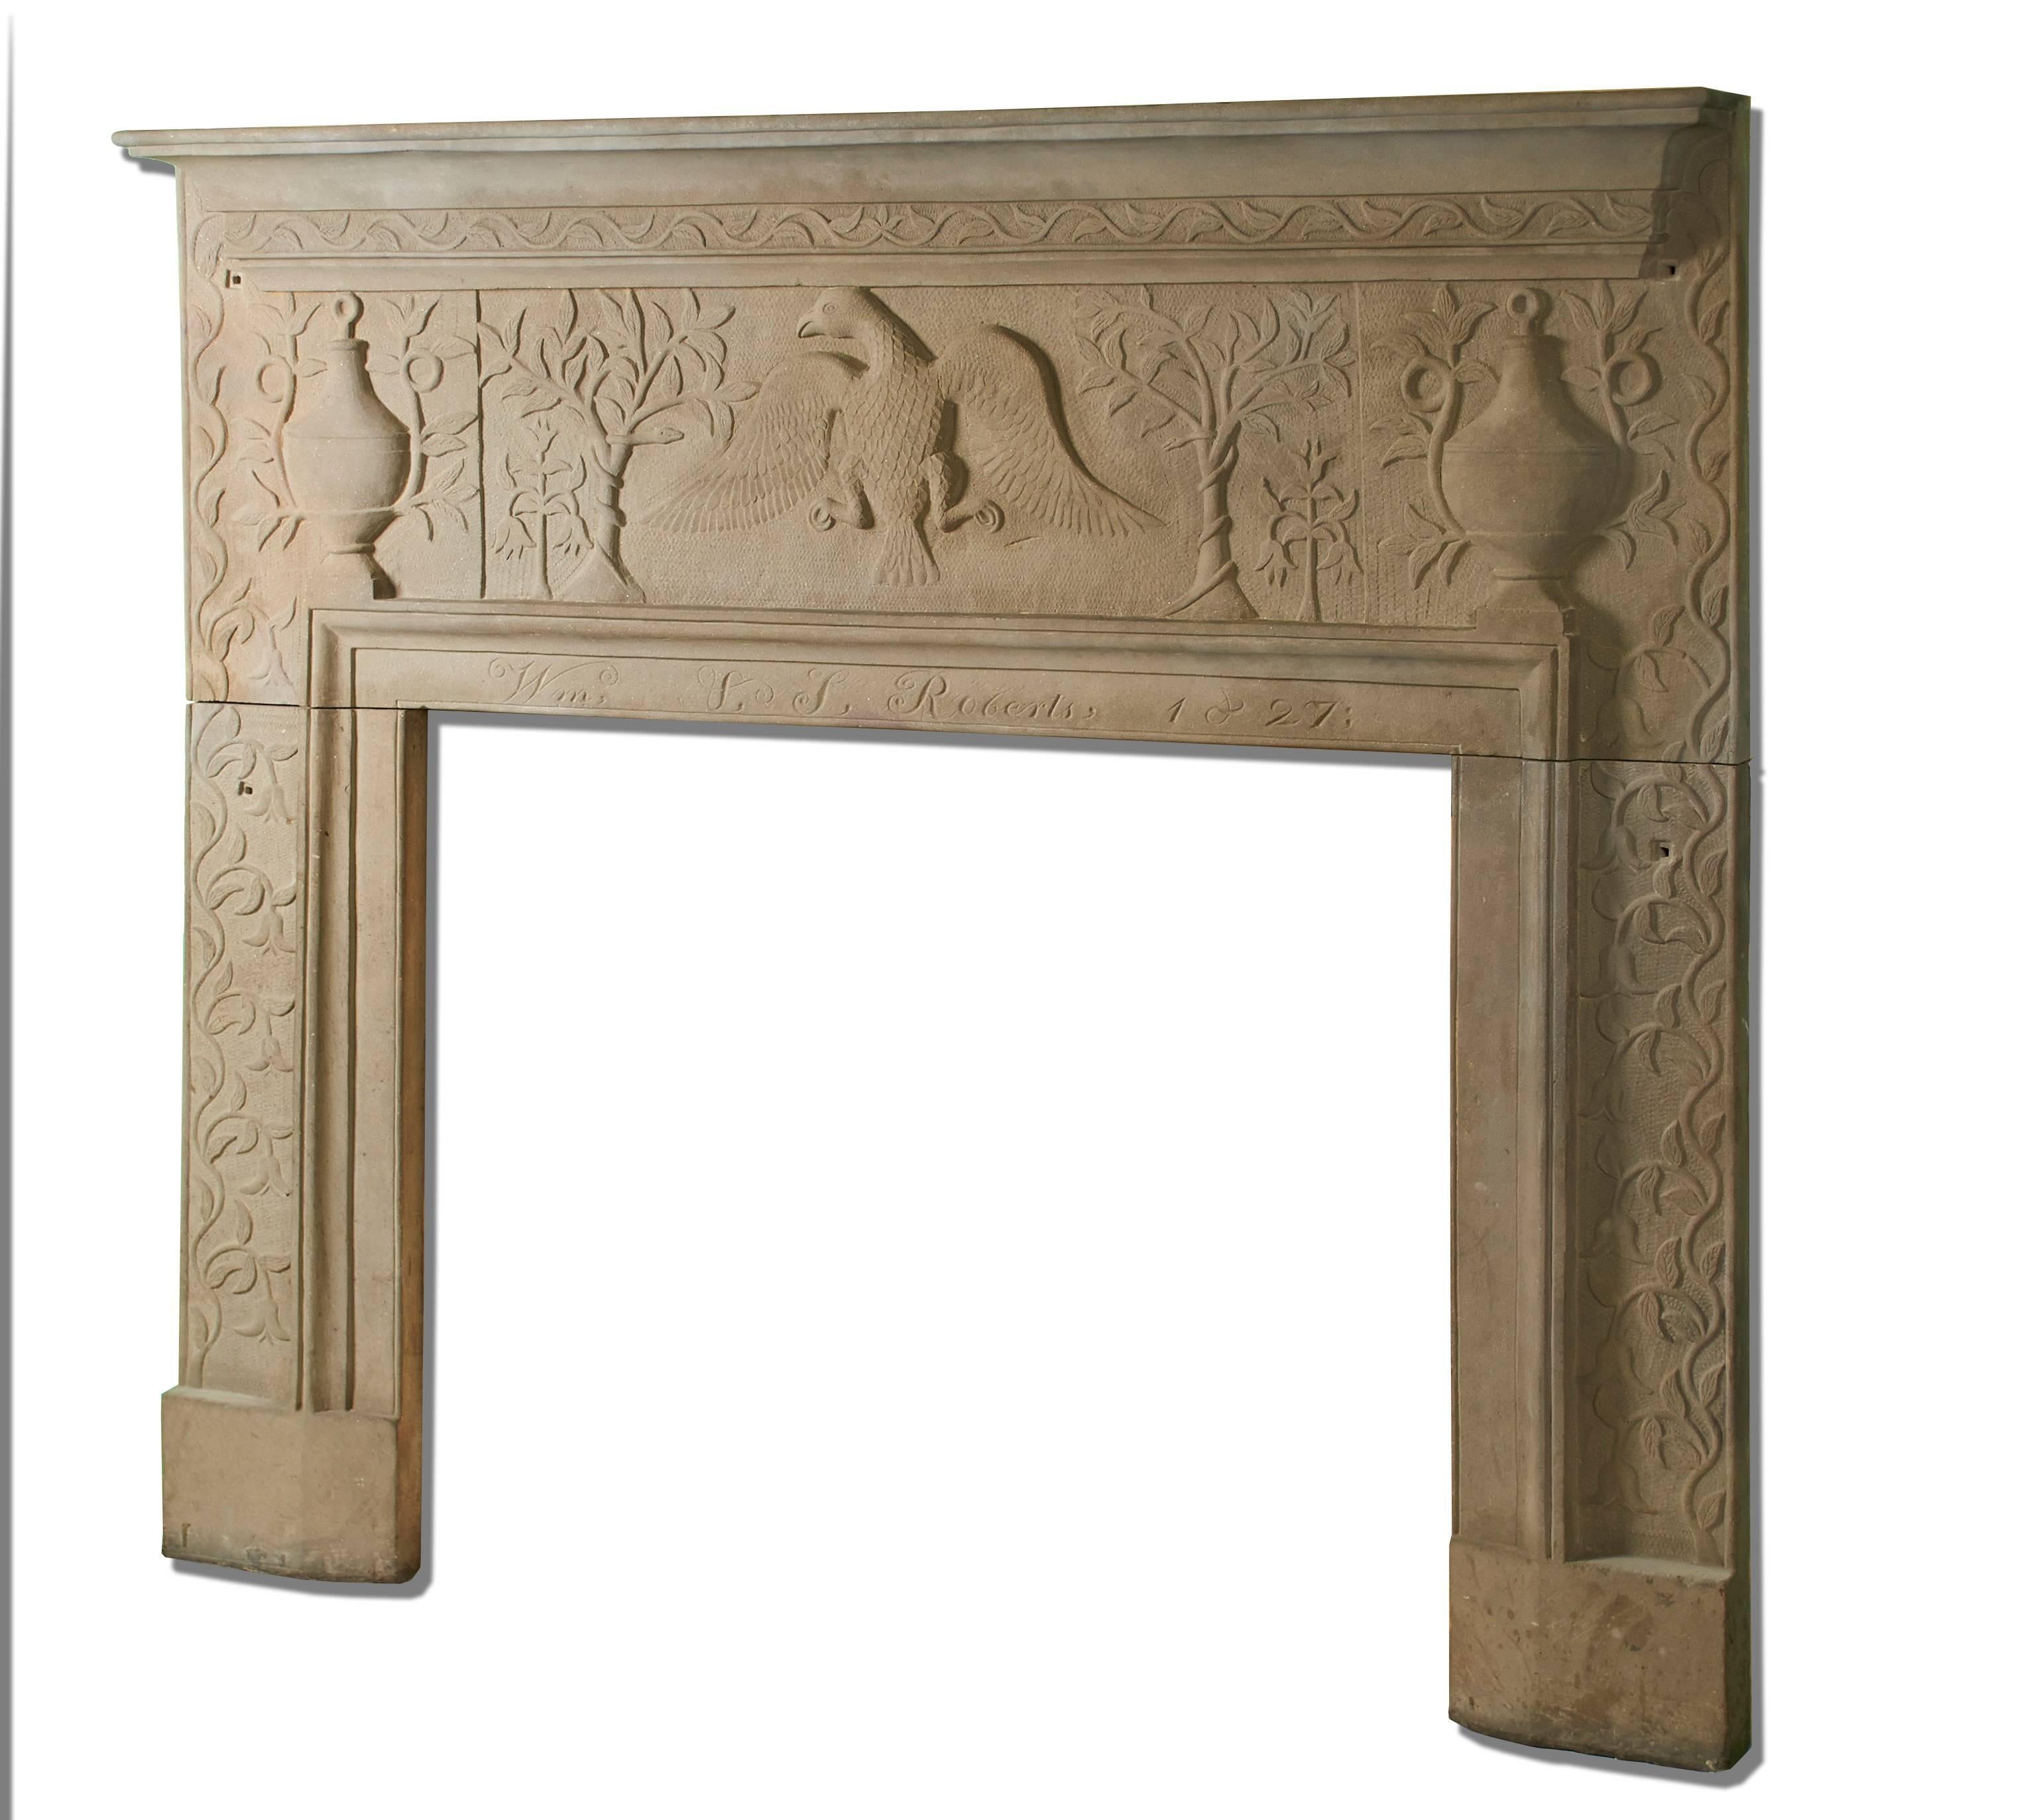 American Carved Sandstone Mantel from Ohio, Dated 1827 For Sale